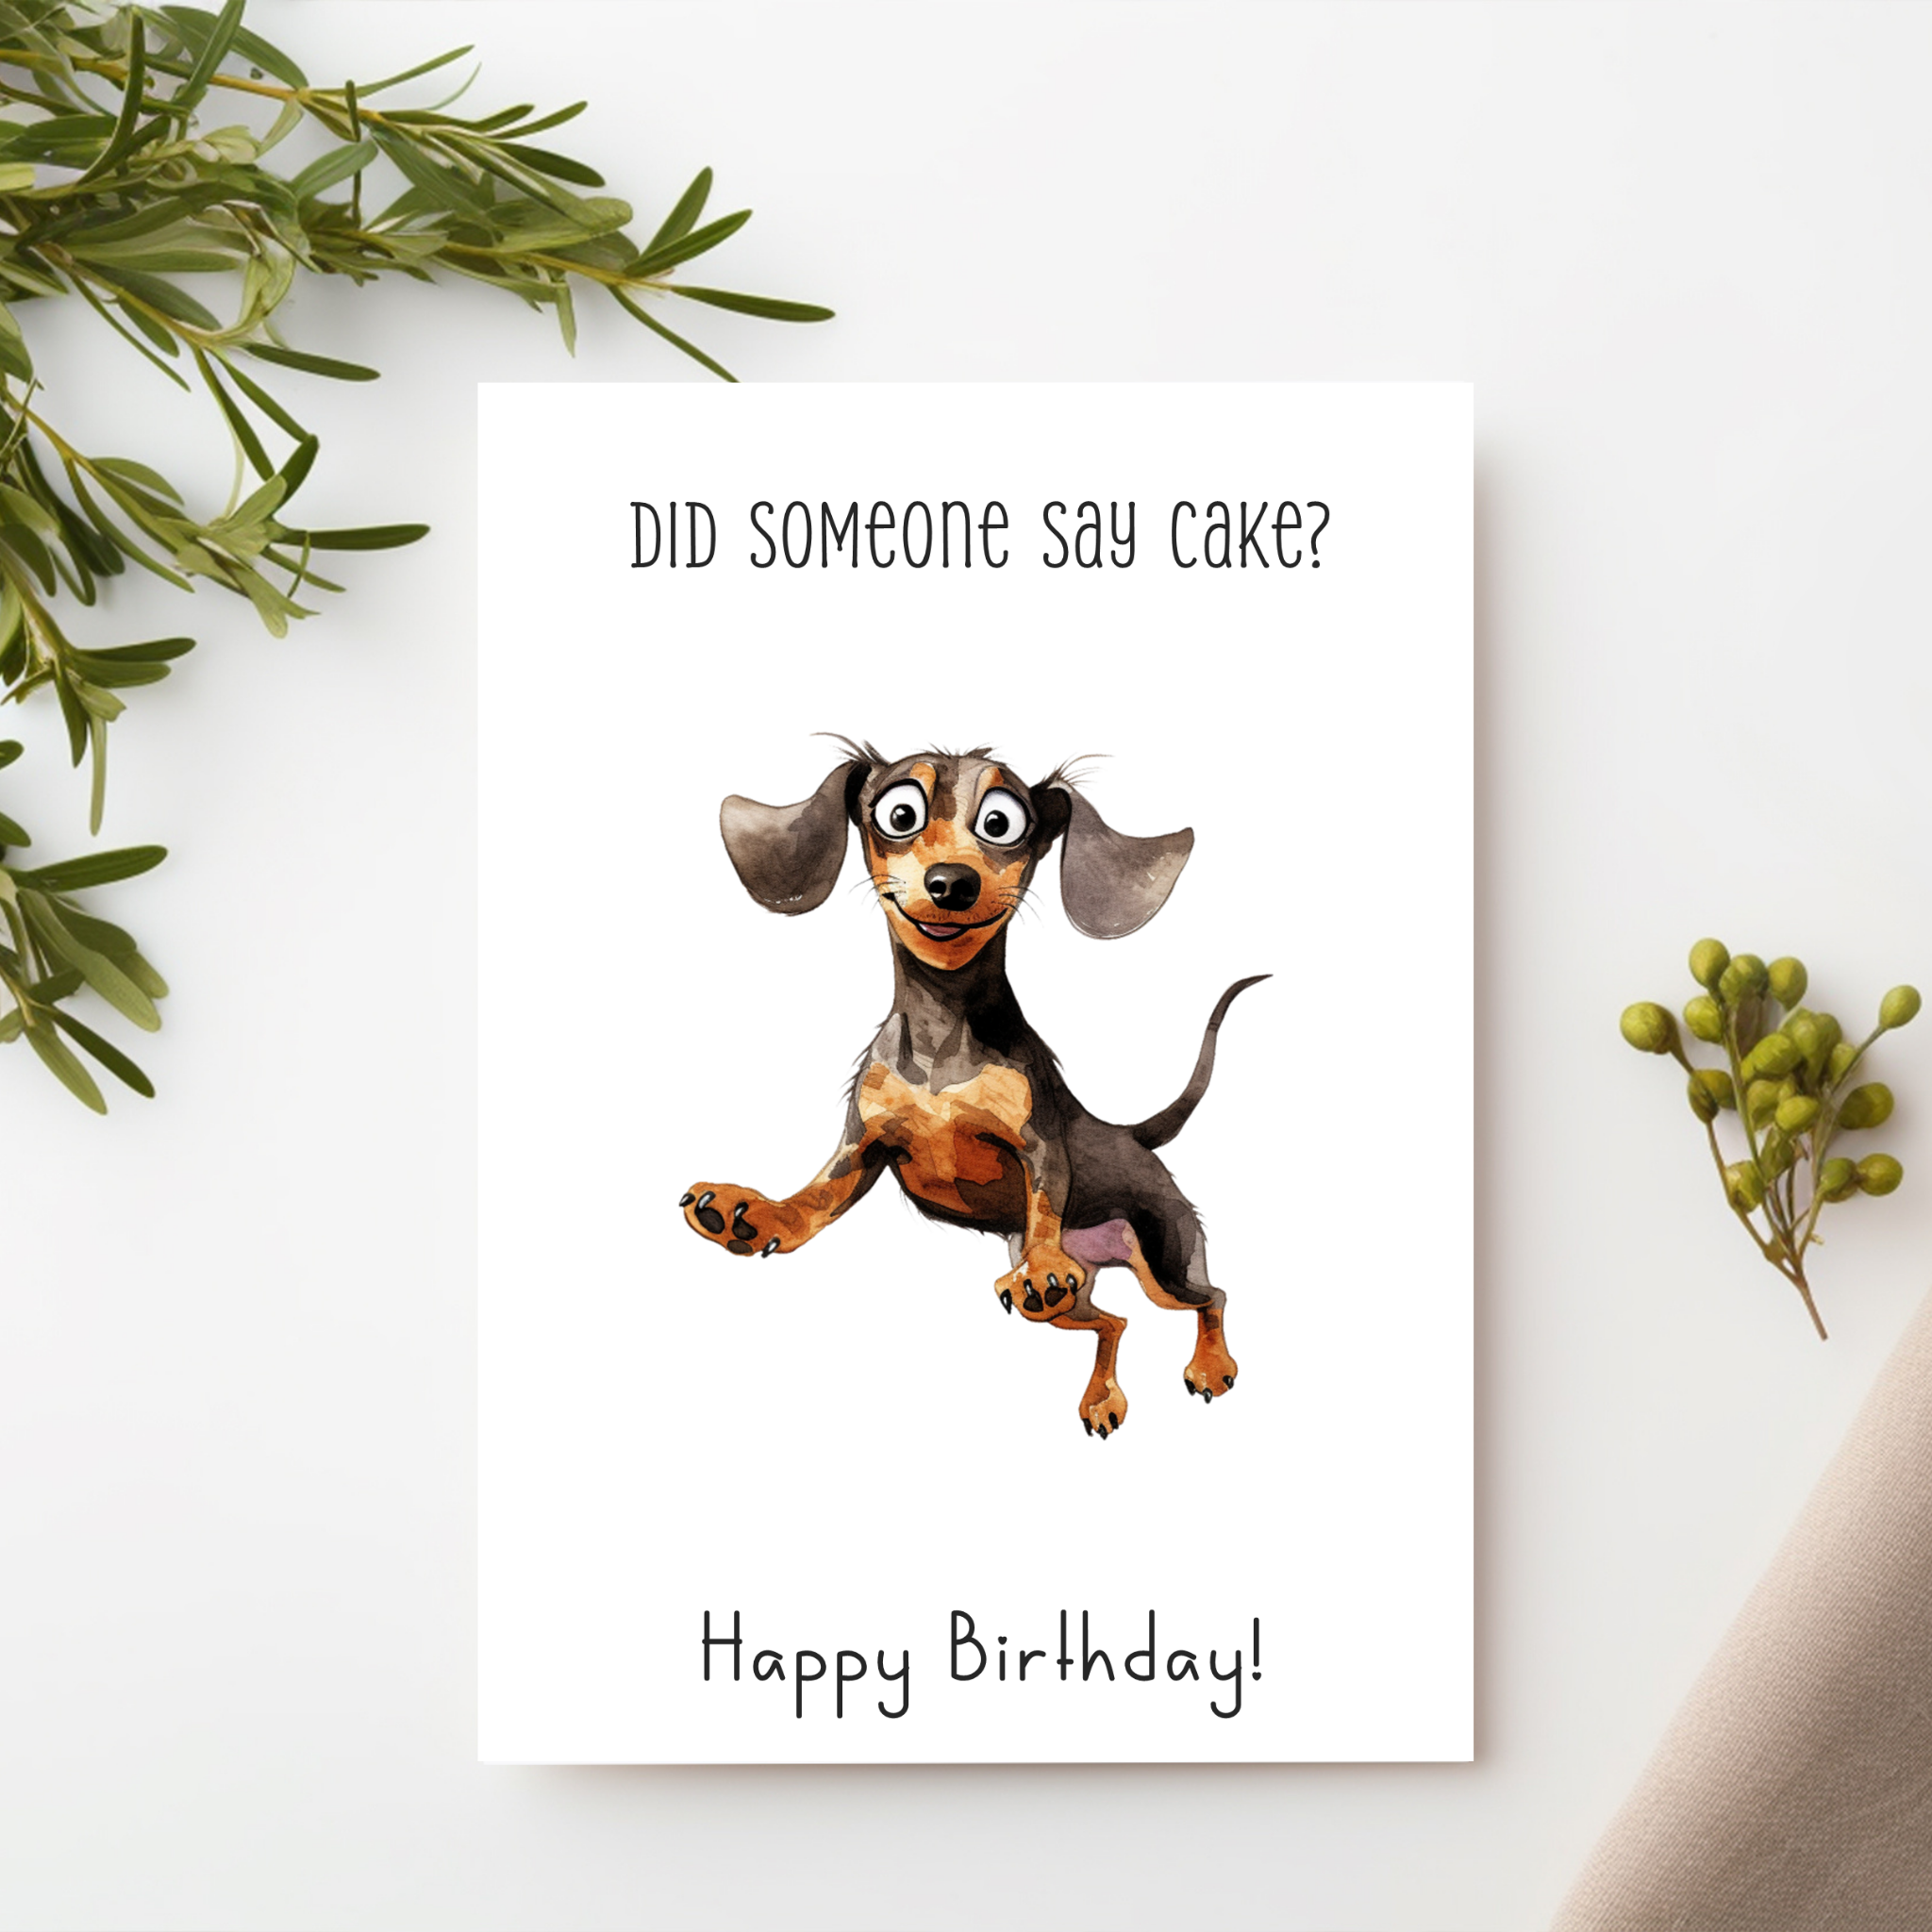 a Happy Birthday card with a cute dachshund dog looking excited picture on a white background with text above saying "Did someone say cake?" and underneath the picture the text Happy Birthday!